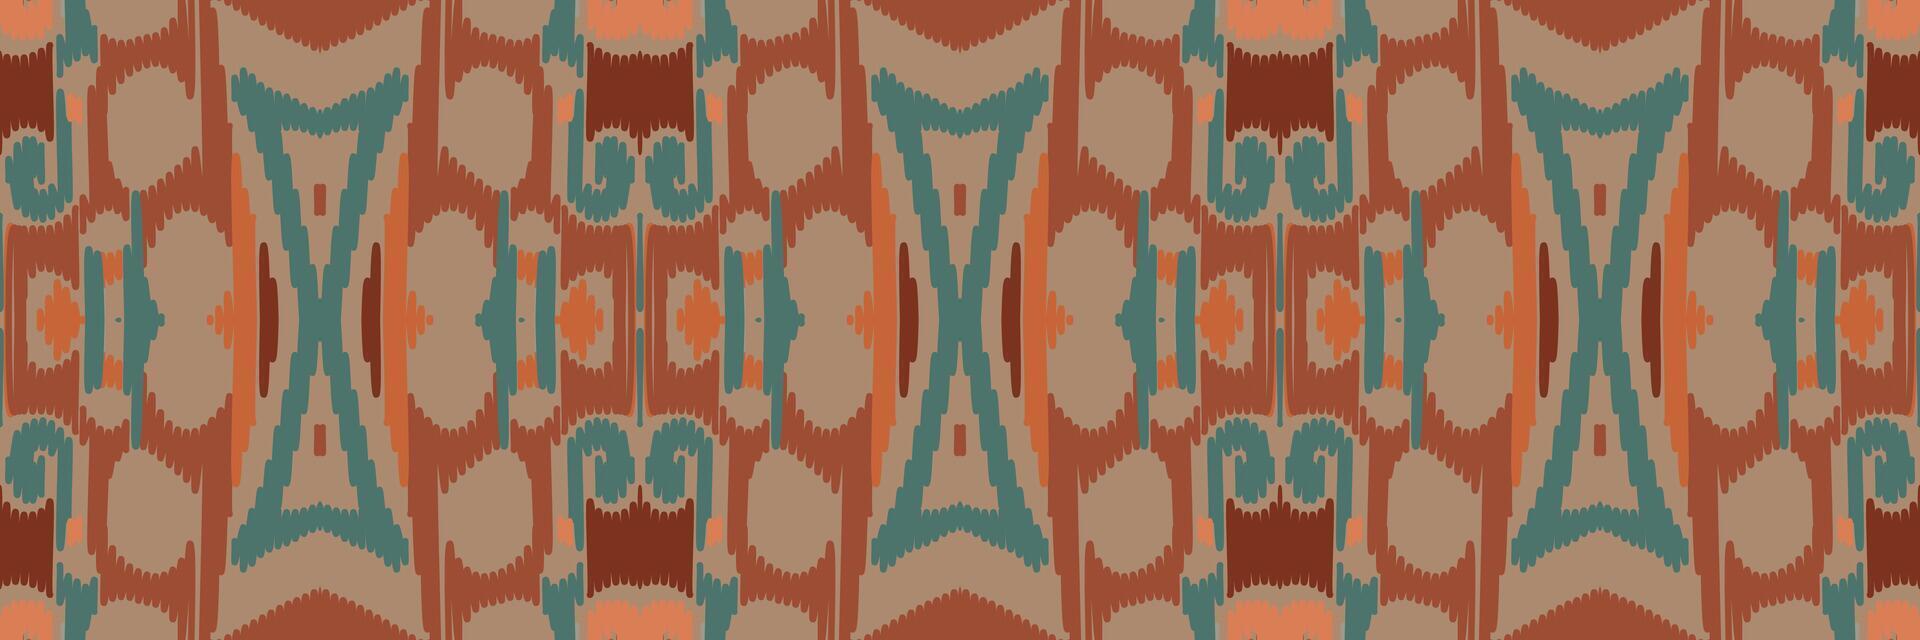 Abstract ethnic pattern art. Ikat seamless pattern in tribal. Design for background, wallpaper, vector illustration, fabric, clothing, carpet, embroidery.